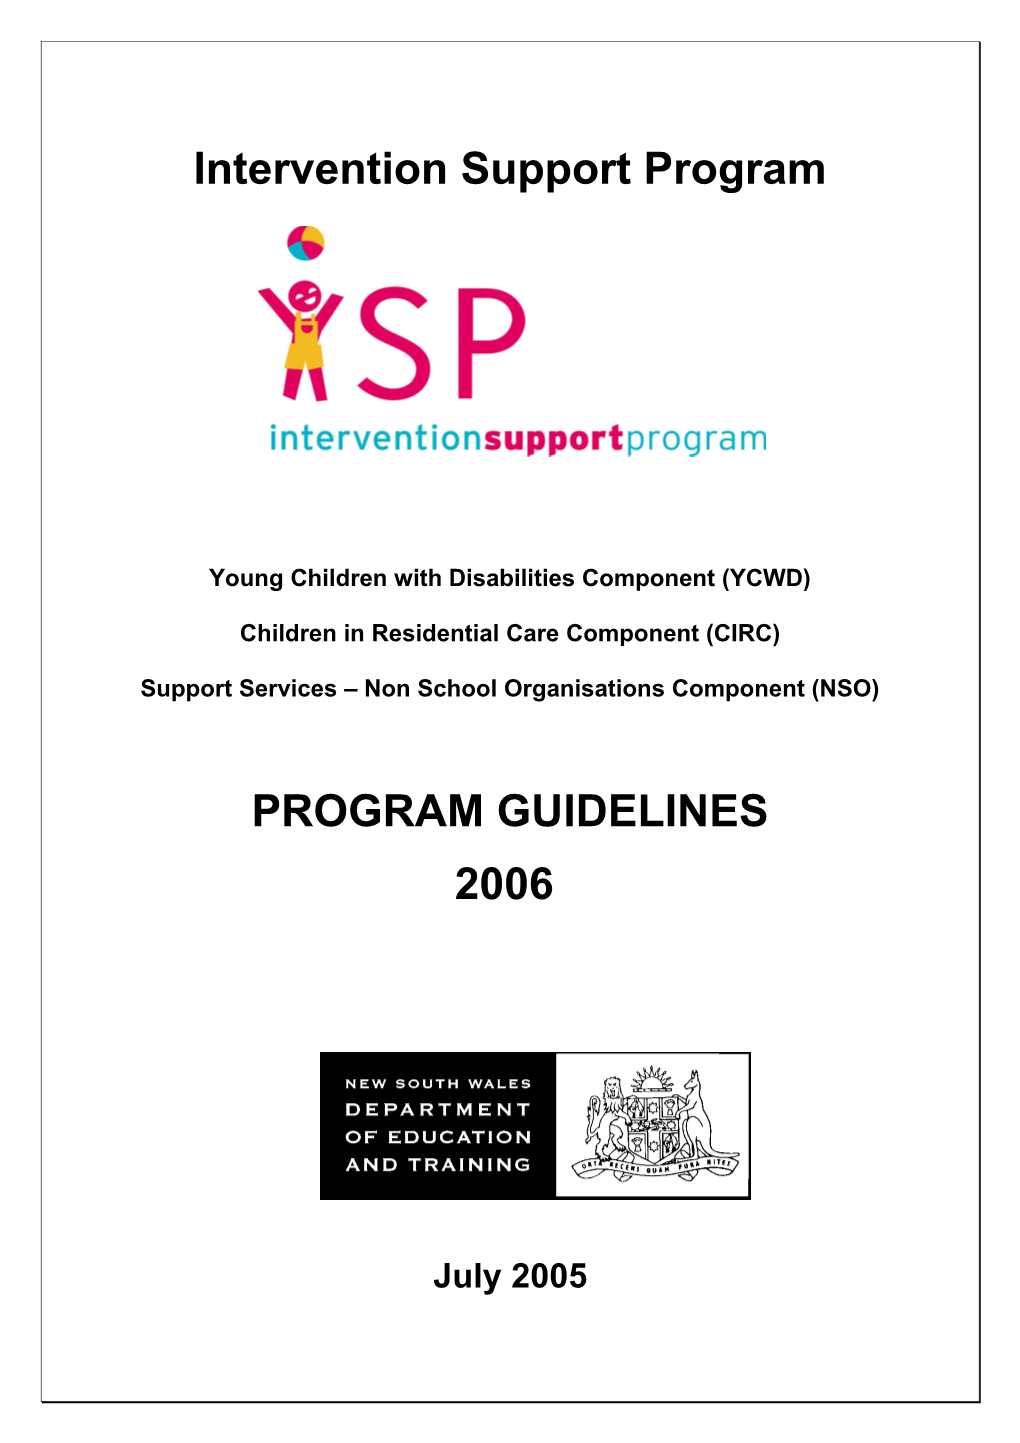 Young Children with Disabilities Component (YCWD)